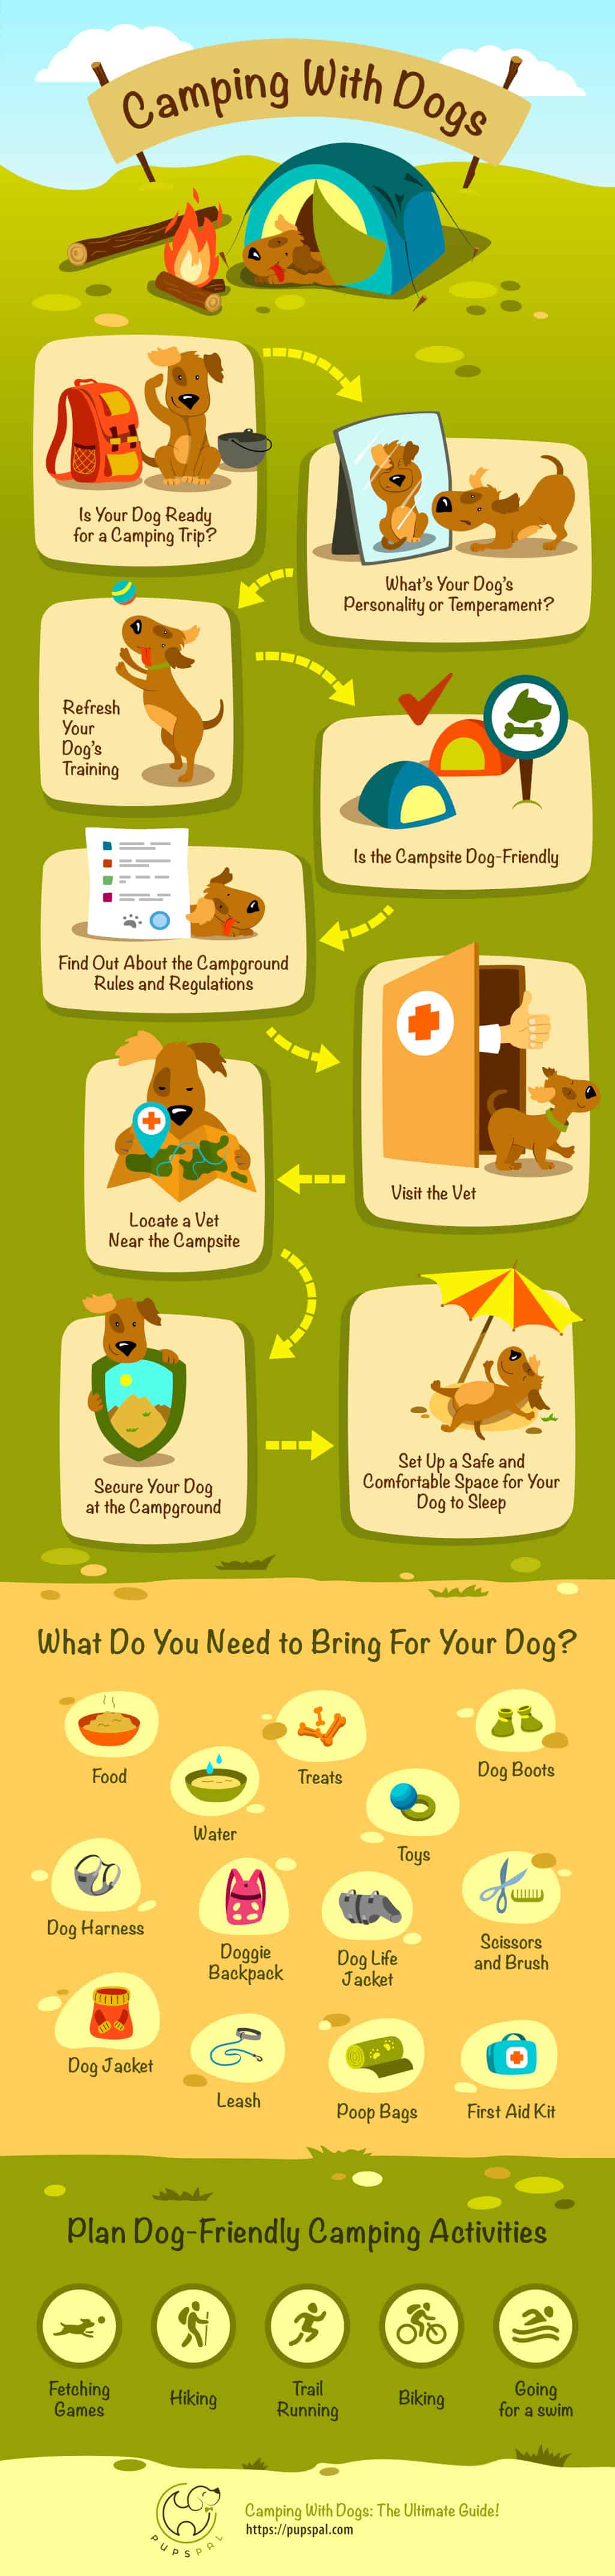 Camping With Dogs Infographic